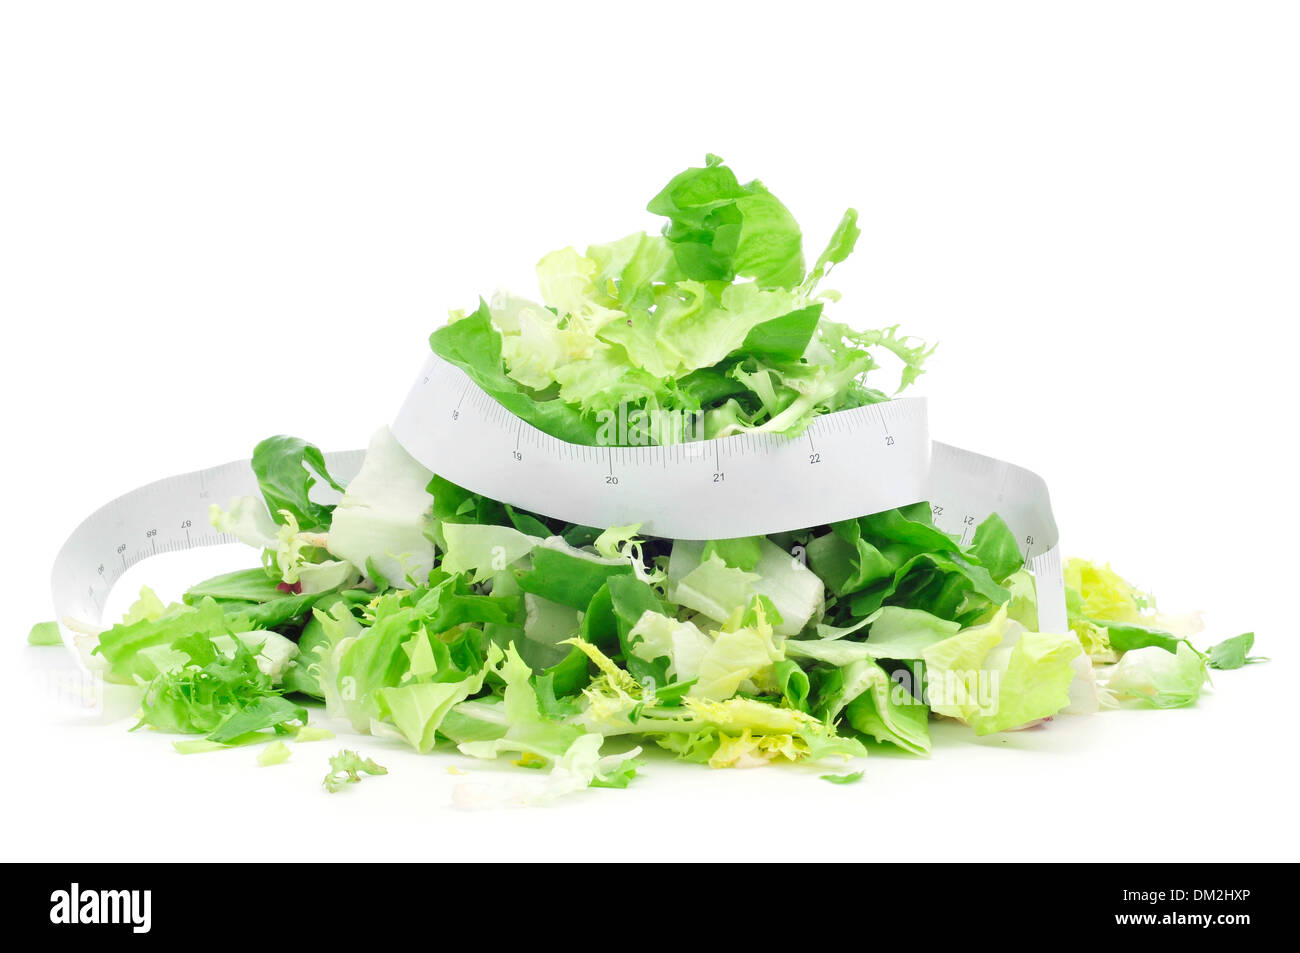 closeup of a pile of salad leaves and a measuring tape, symbolizing the dieting concept or to stay fit Stock Photo